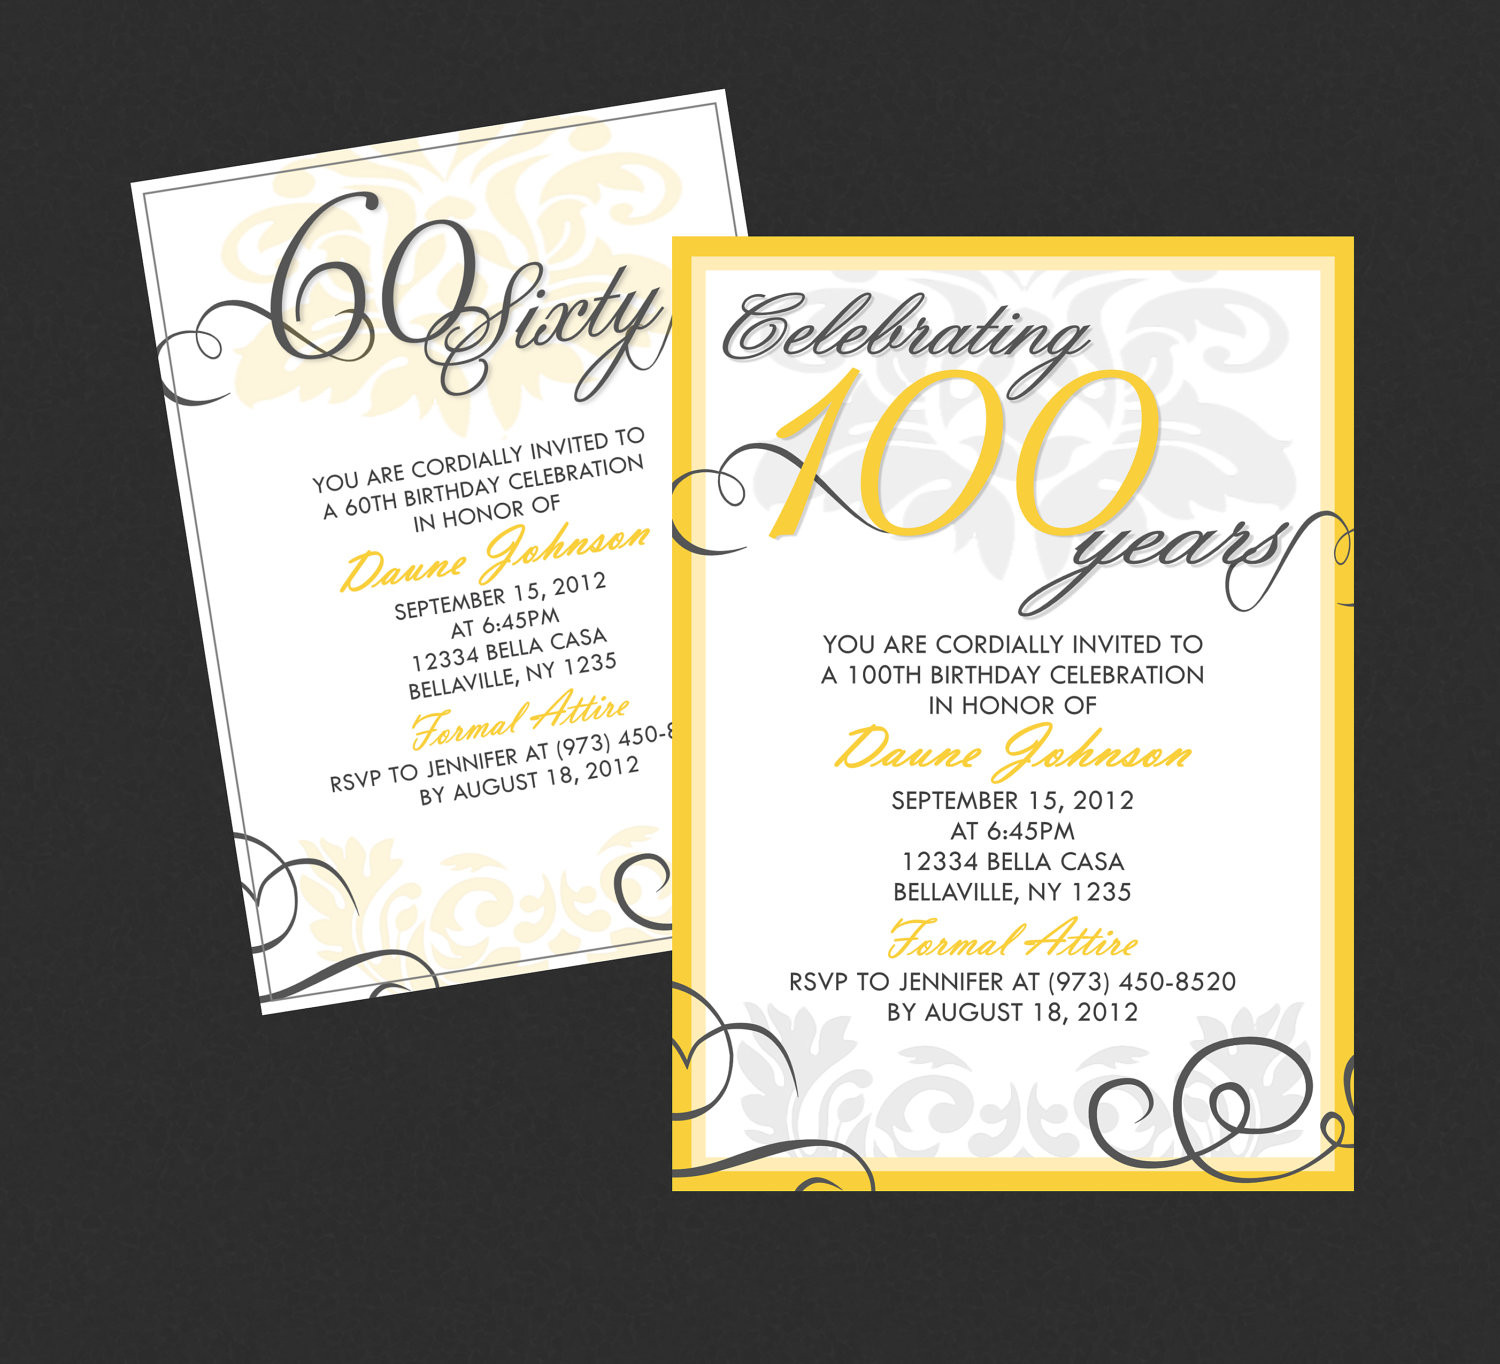 the-25-best-ideas-for-adult-birthday-invitation-wording-home-family-style-and-art-ideas